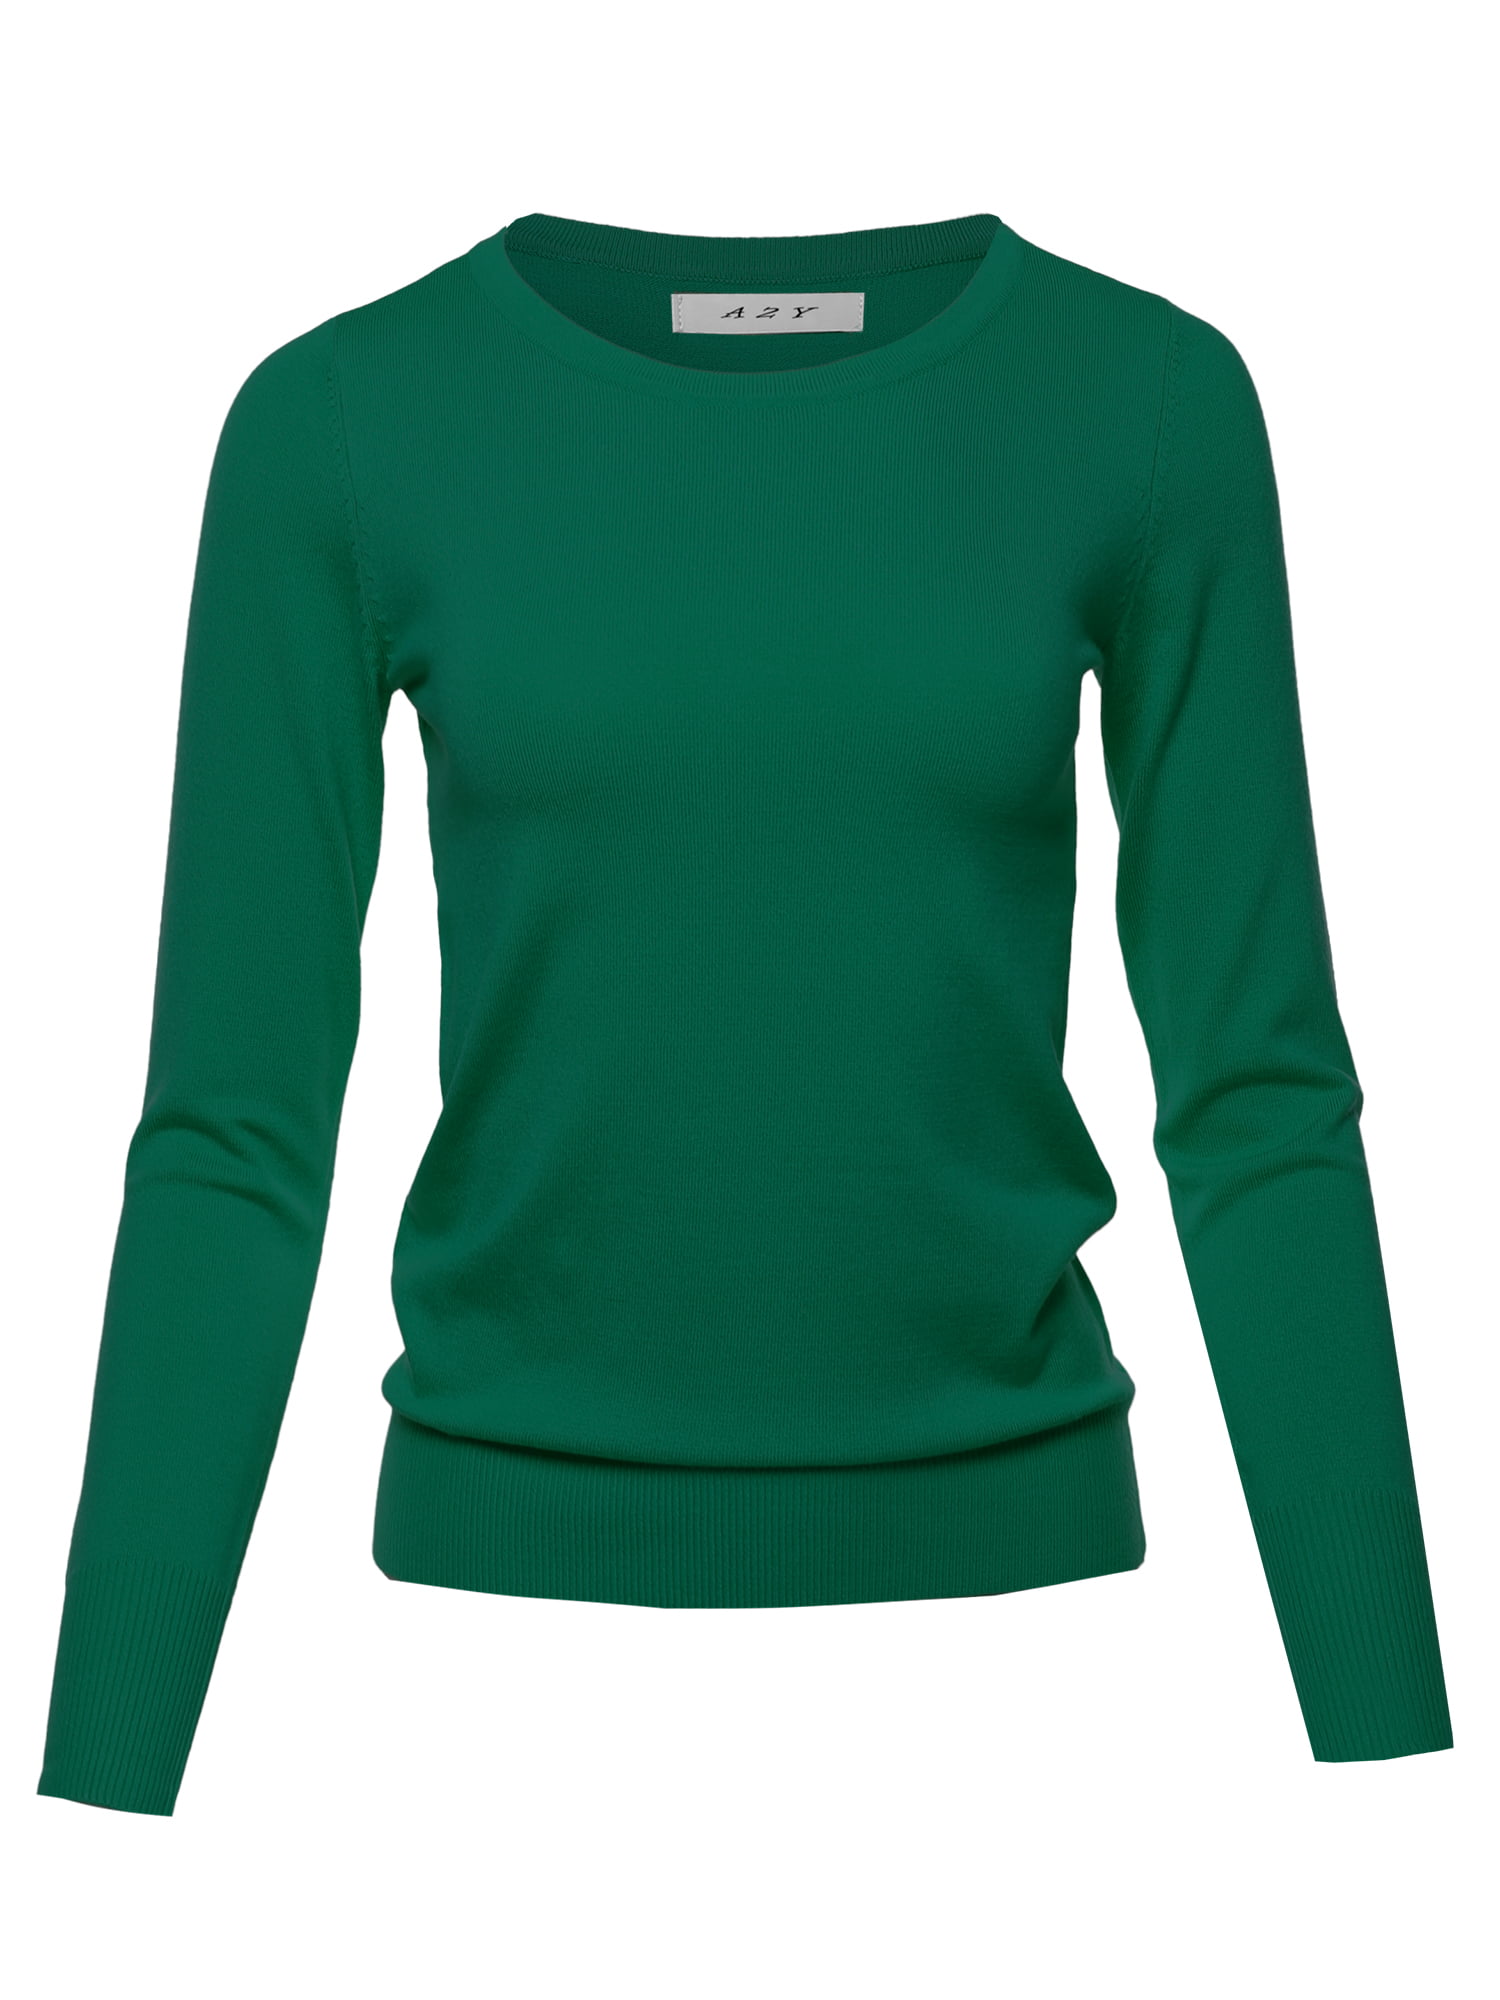 A2Y Women's Fitted Crew Neck Long Sleeve Pullover Classic Sweater Green ...